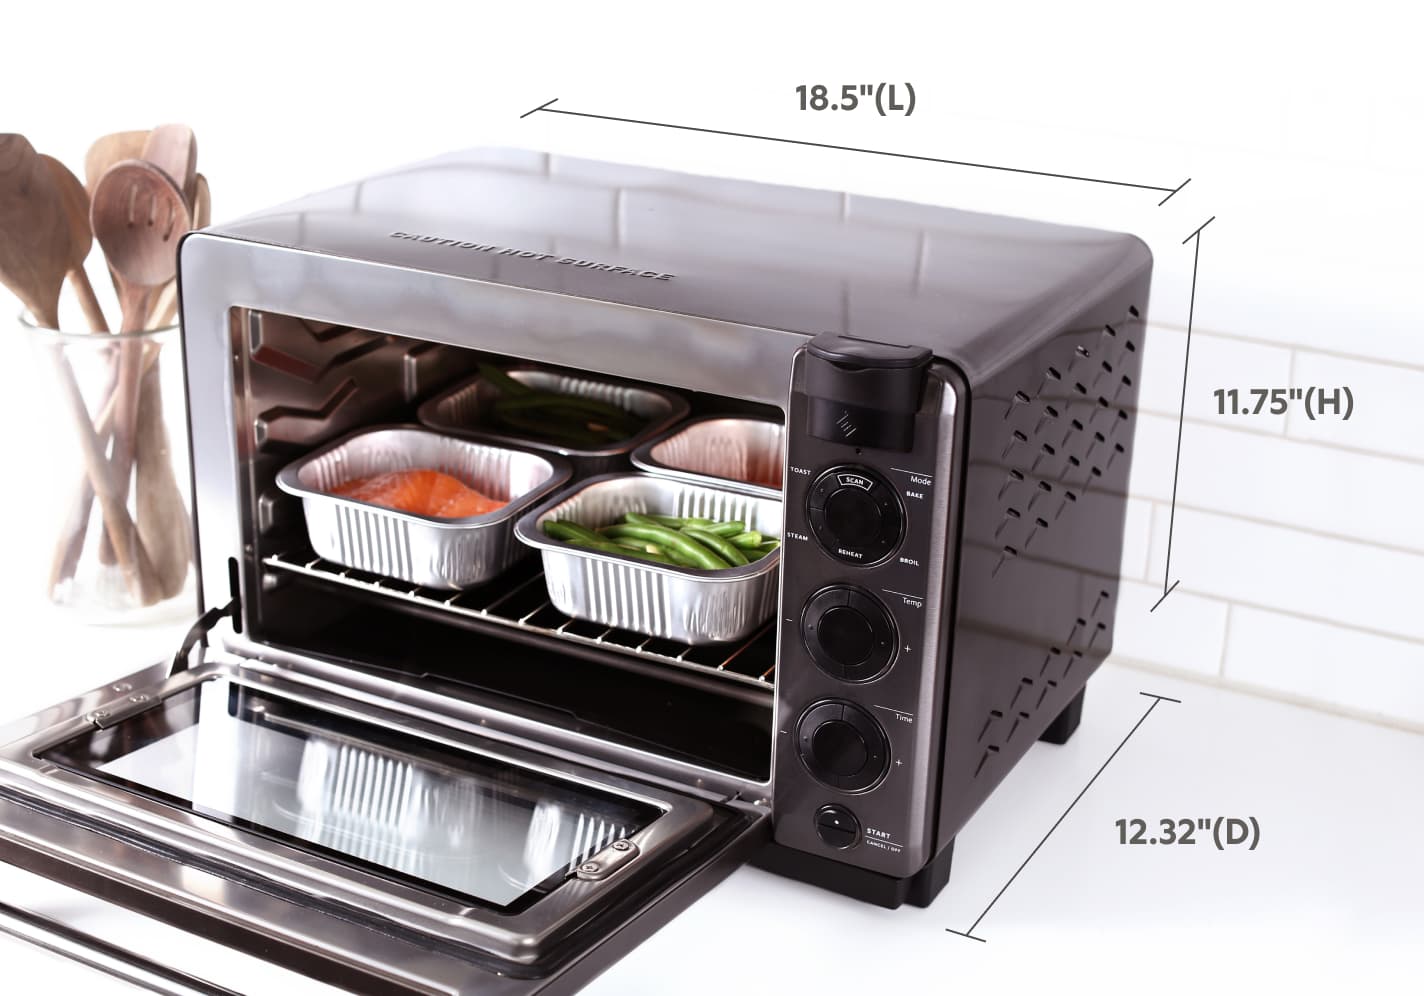 Tovala Review: Is This Smart Oven & Meal Delivery Service Worth It